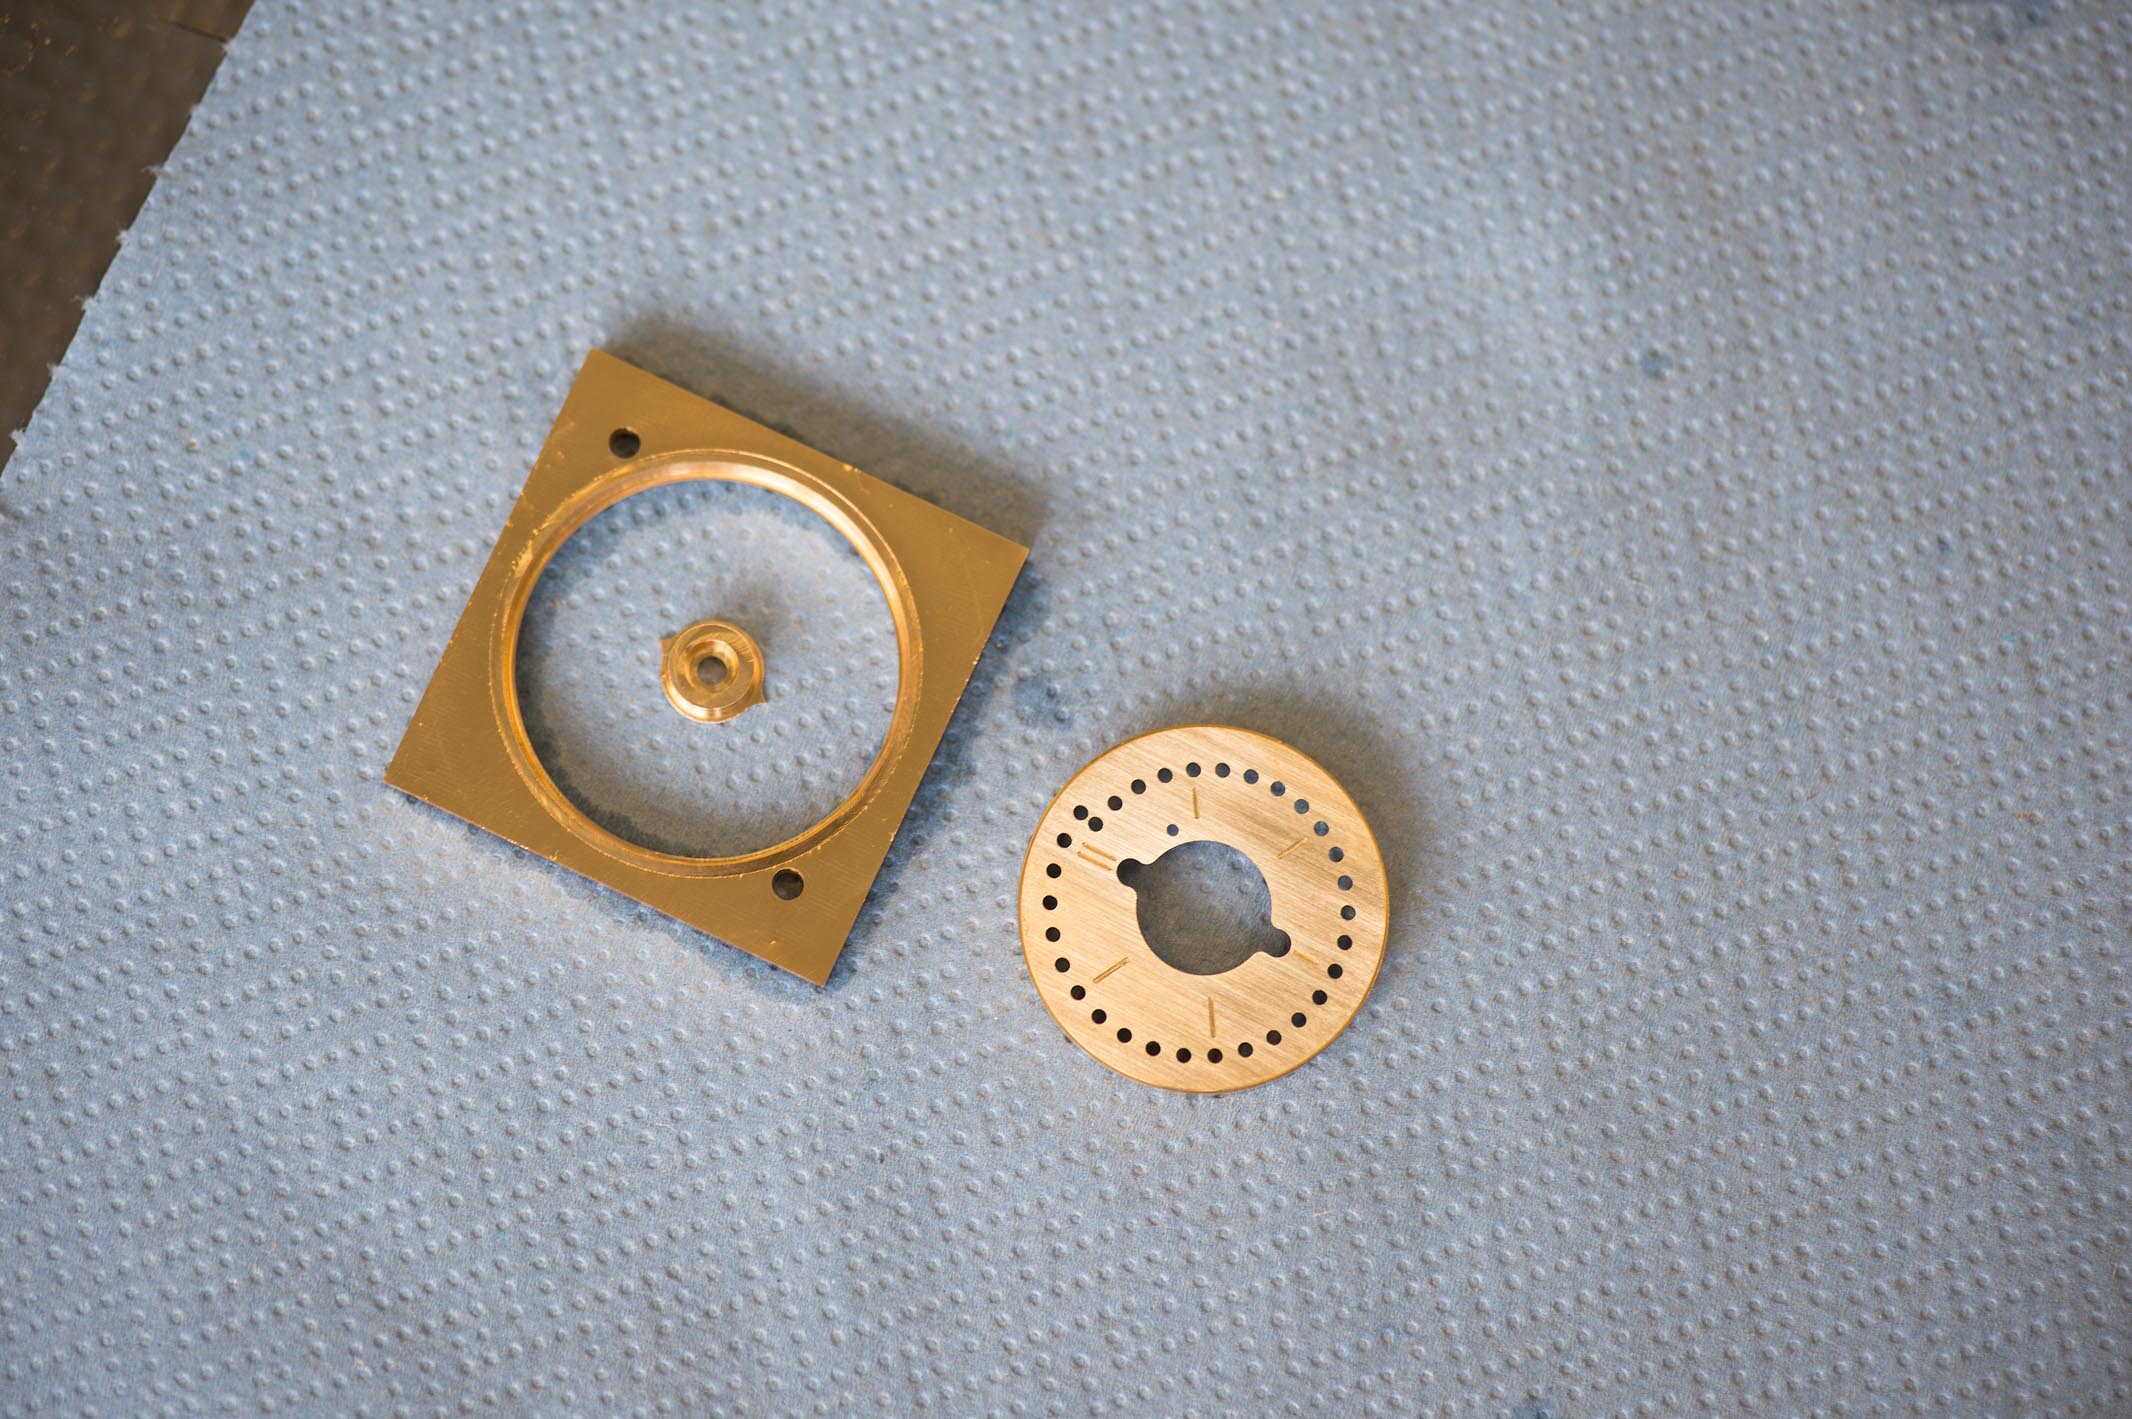 The finished dial and the spare material which will be recycled.